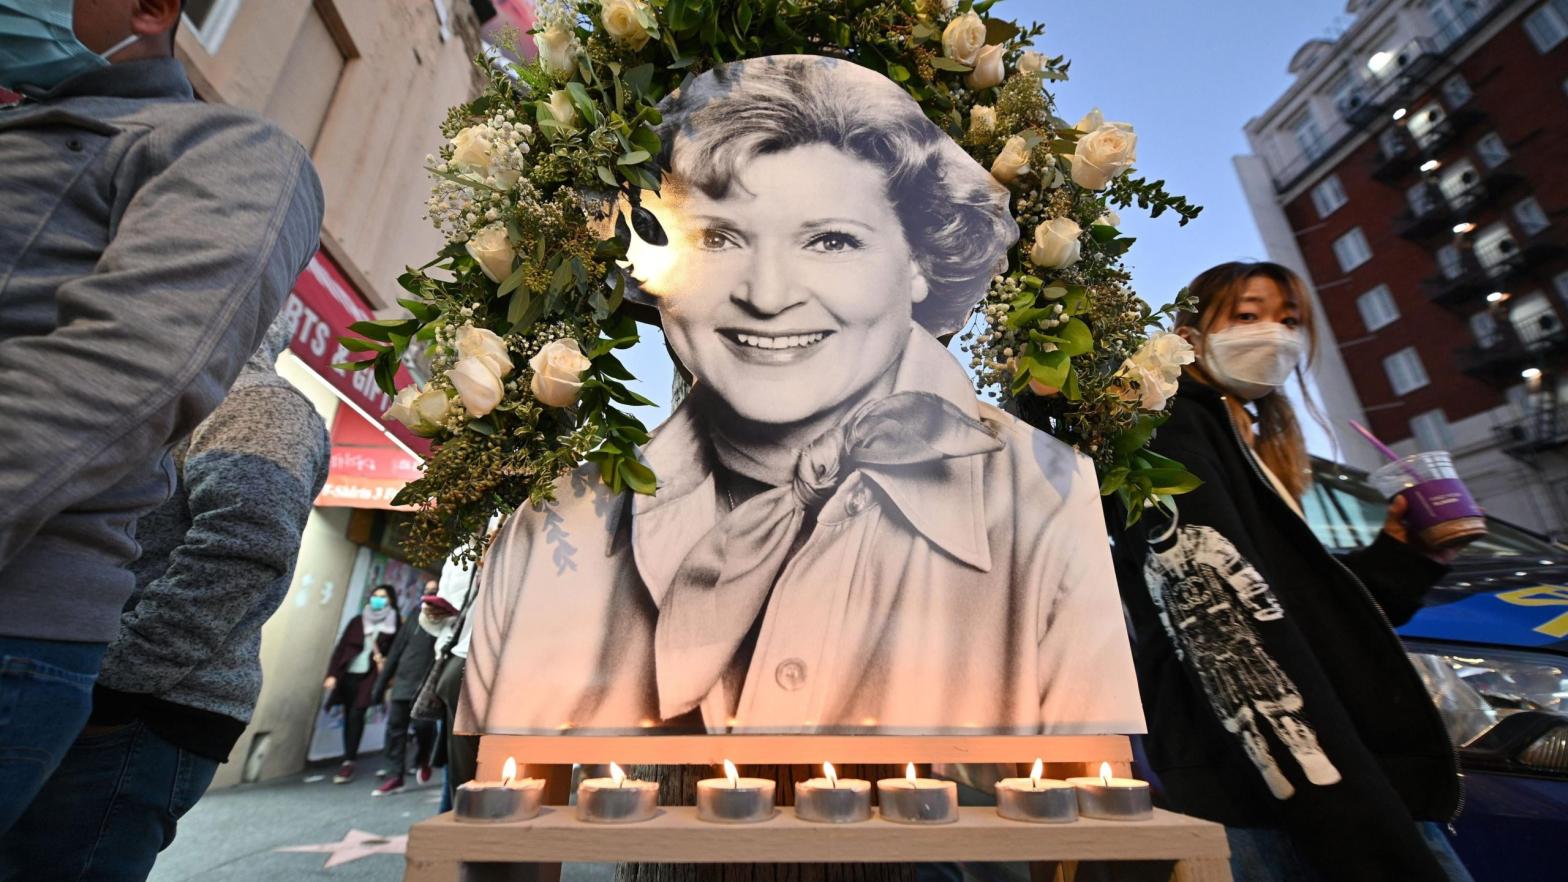 Candles burn at a memorial to late actress Betty White next to her star on the Hollywood Walk of Fame, December 31, 2021 in Hollywood, California. (Photo: Robyn Beck / AFP, Getty Images)